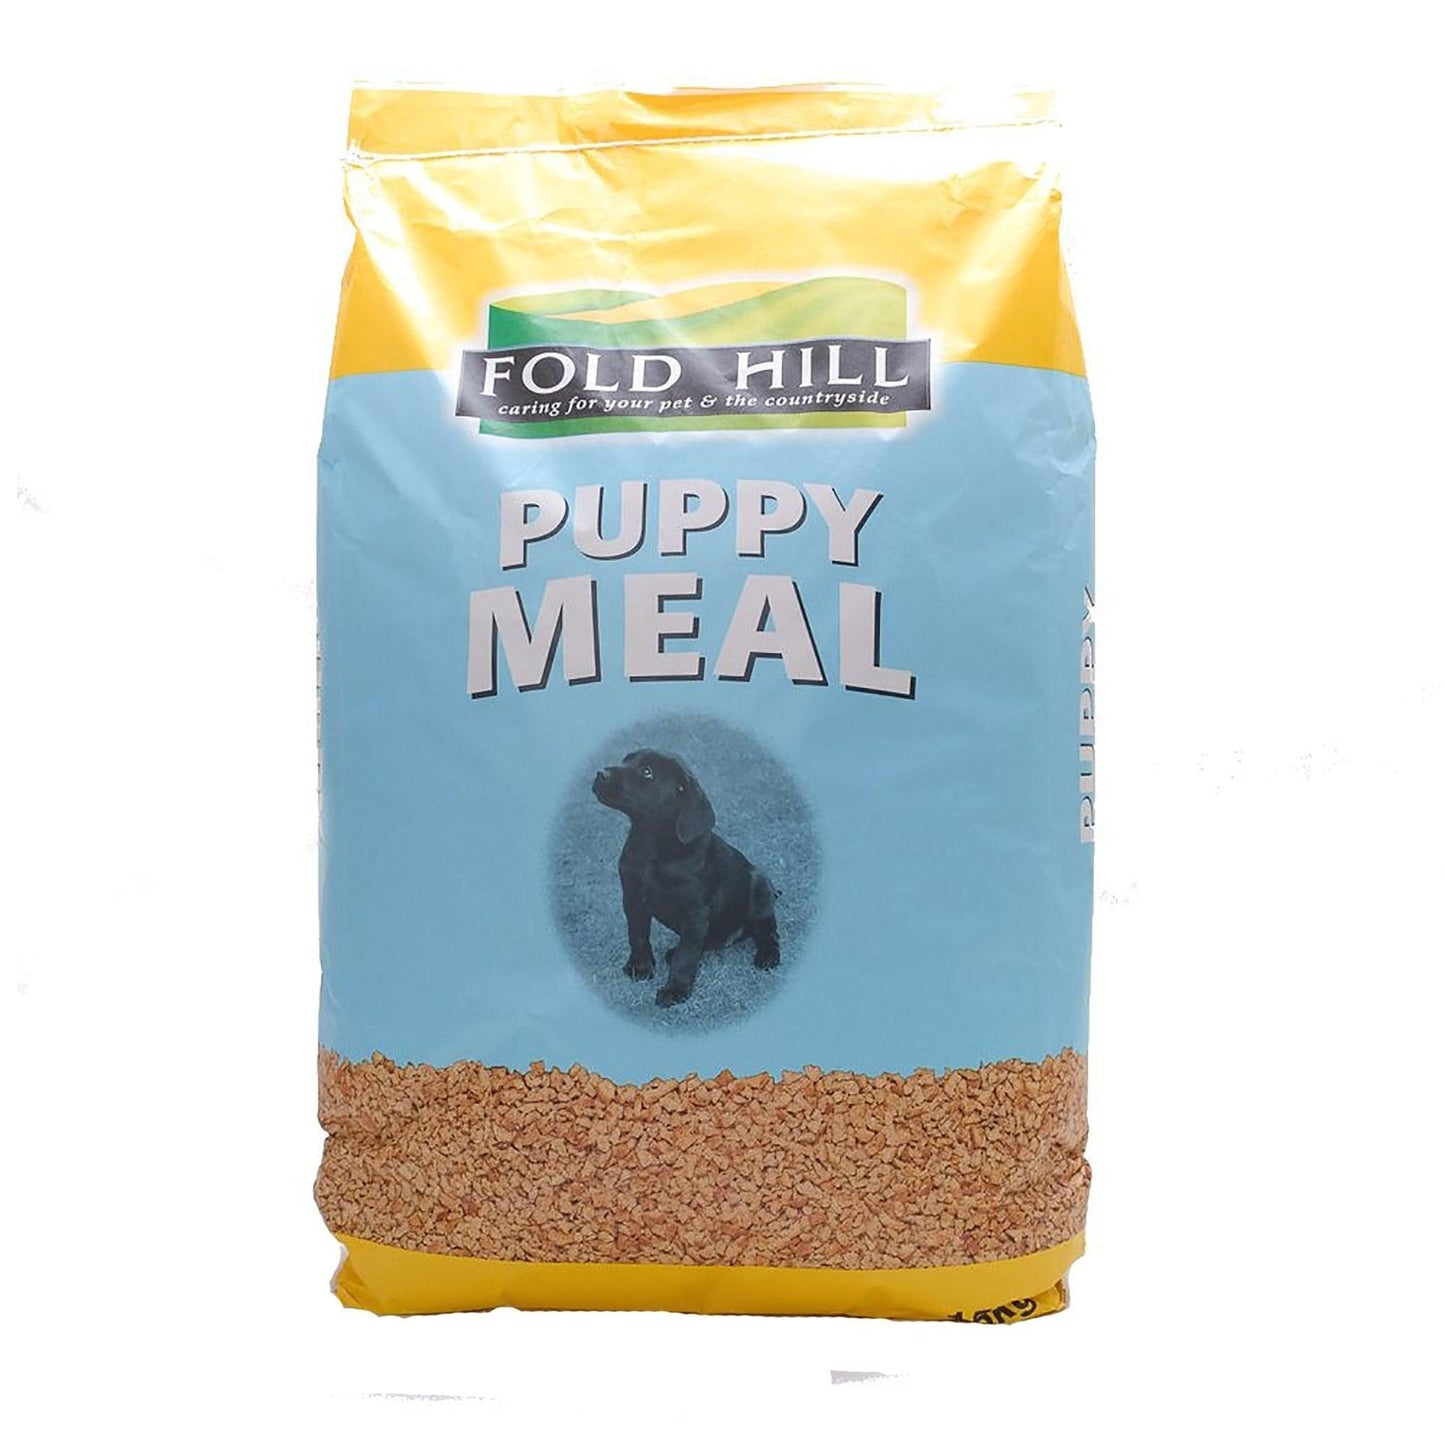 Fold Hill Puppy Meal 15kg - North East Pet Shop Fold Hill